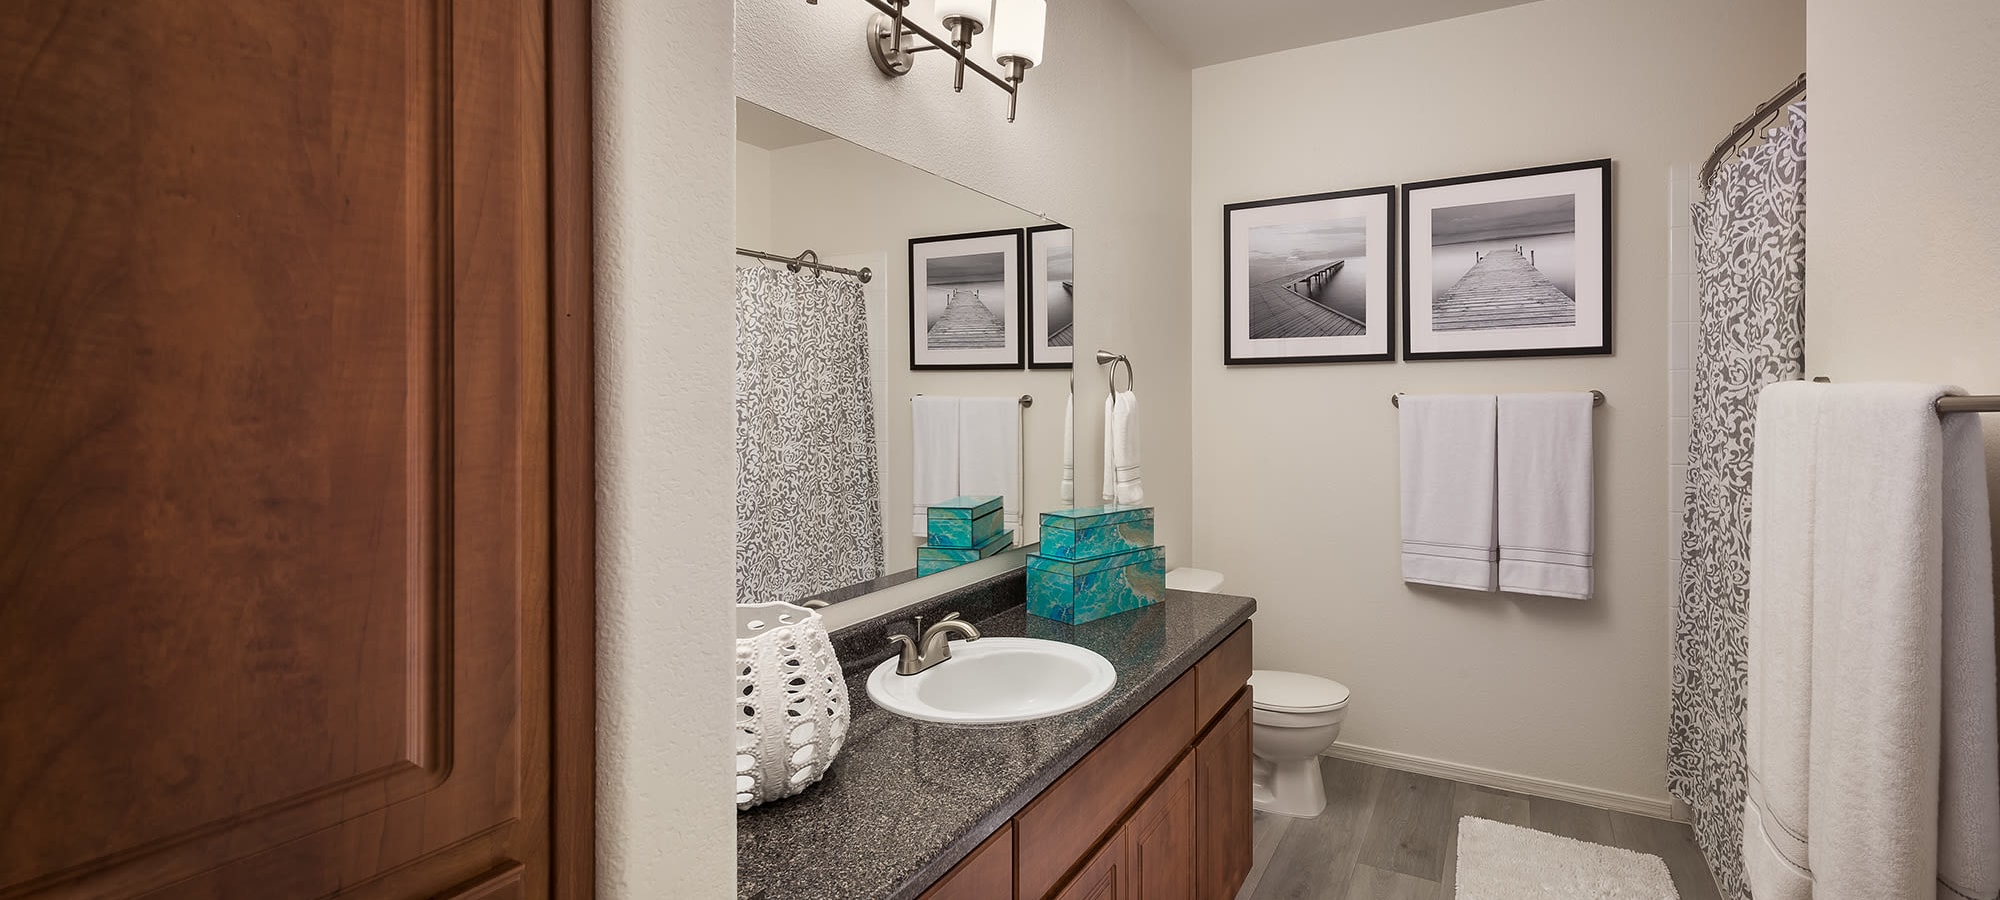 Inviting bathroom at The Reserve at Gilbert Towne Centre in Gilbert, Arizona